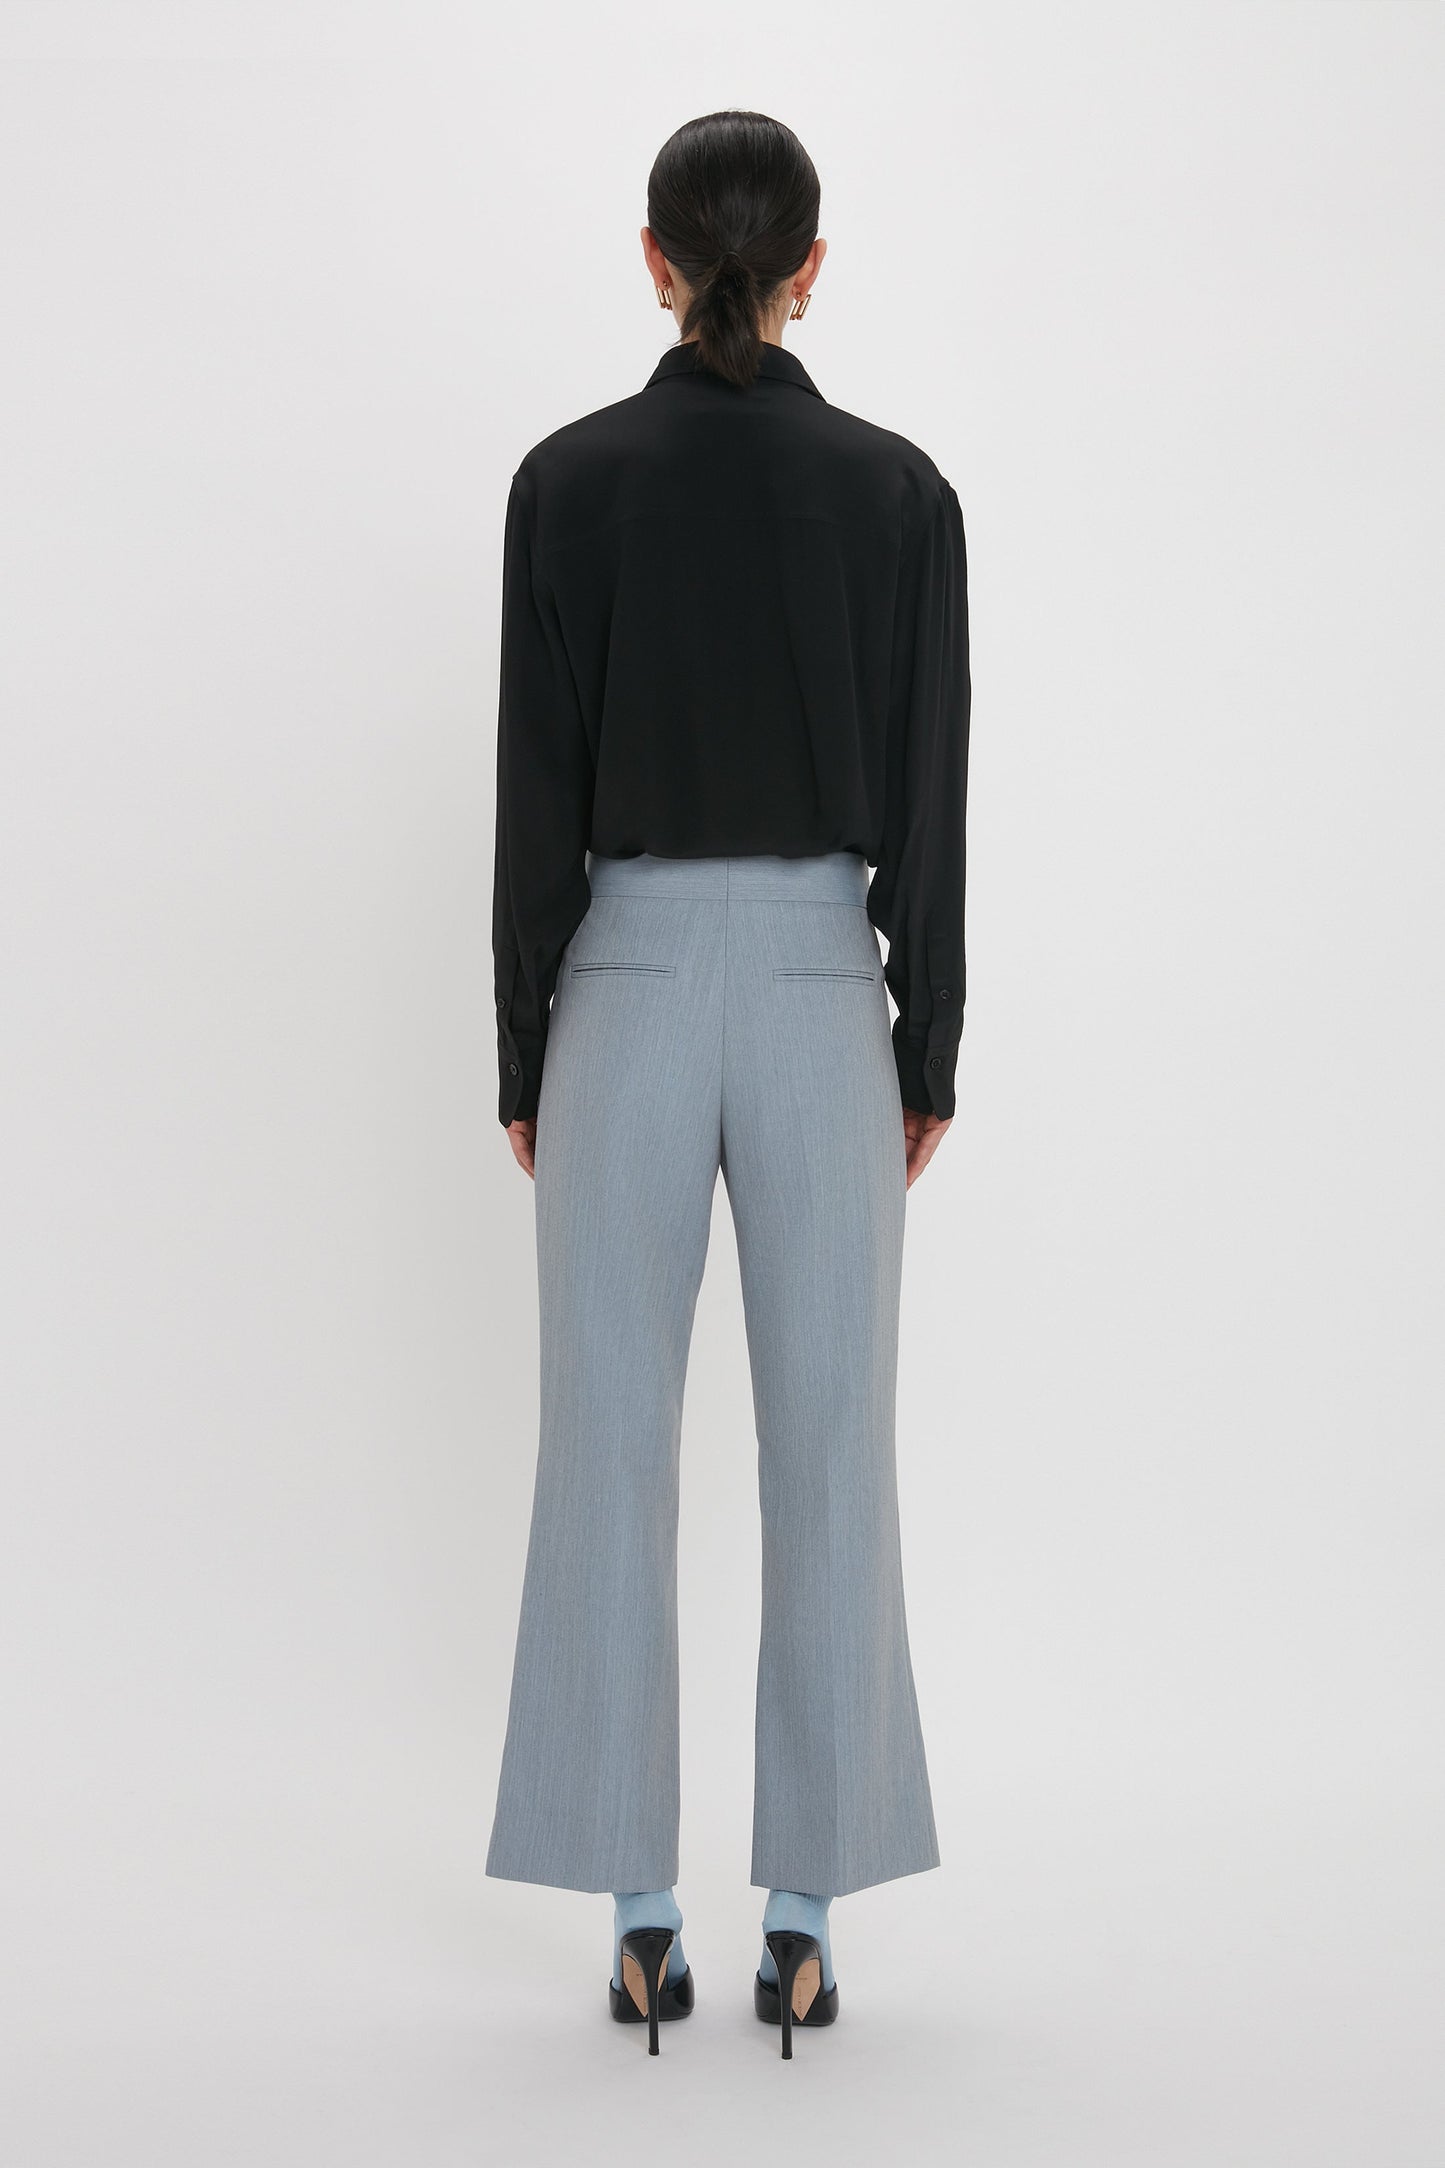 A person stands facing away, wearing a black long-sleeve shirt and Victoria Beckham Exclusive Wide Cropped Flare Trouser In Marina with a contemporary kick hem that offers a flattering hint of ankle, paired with black high heels against a plain white background.